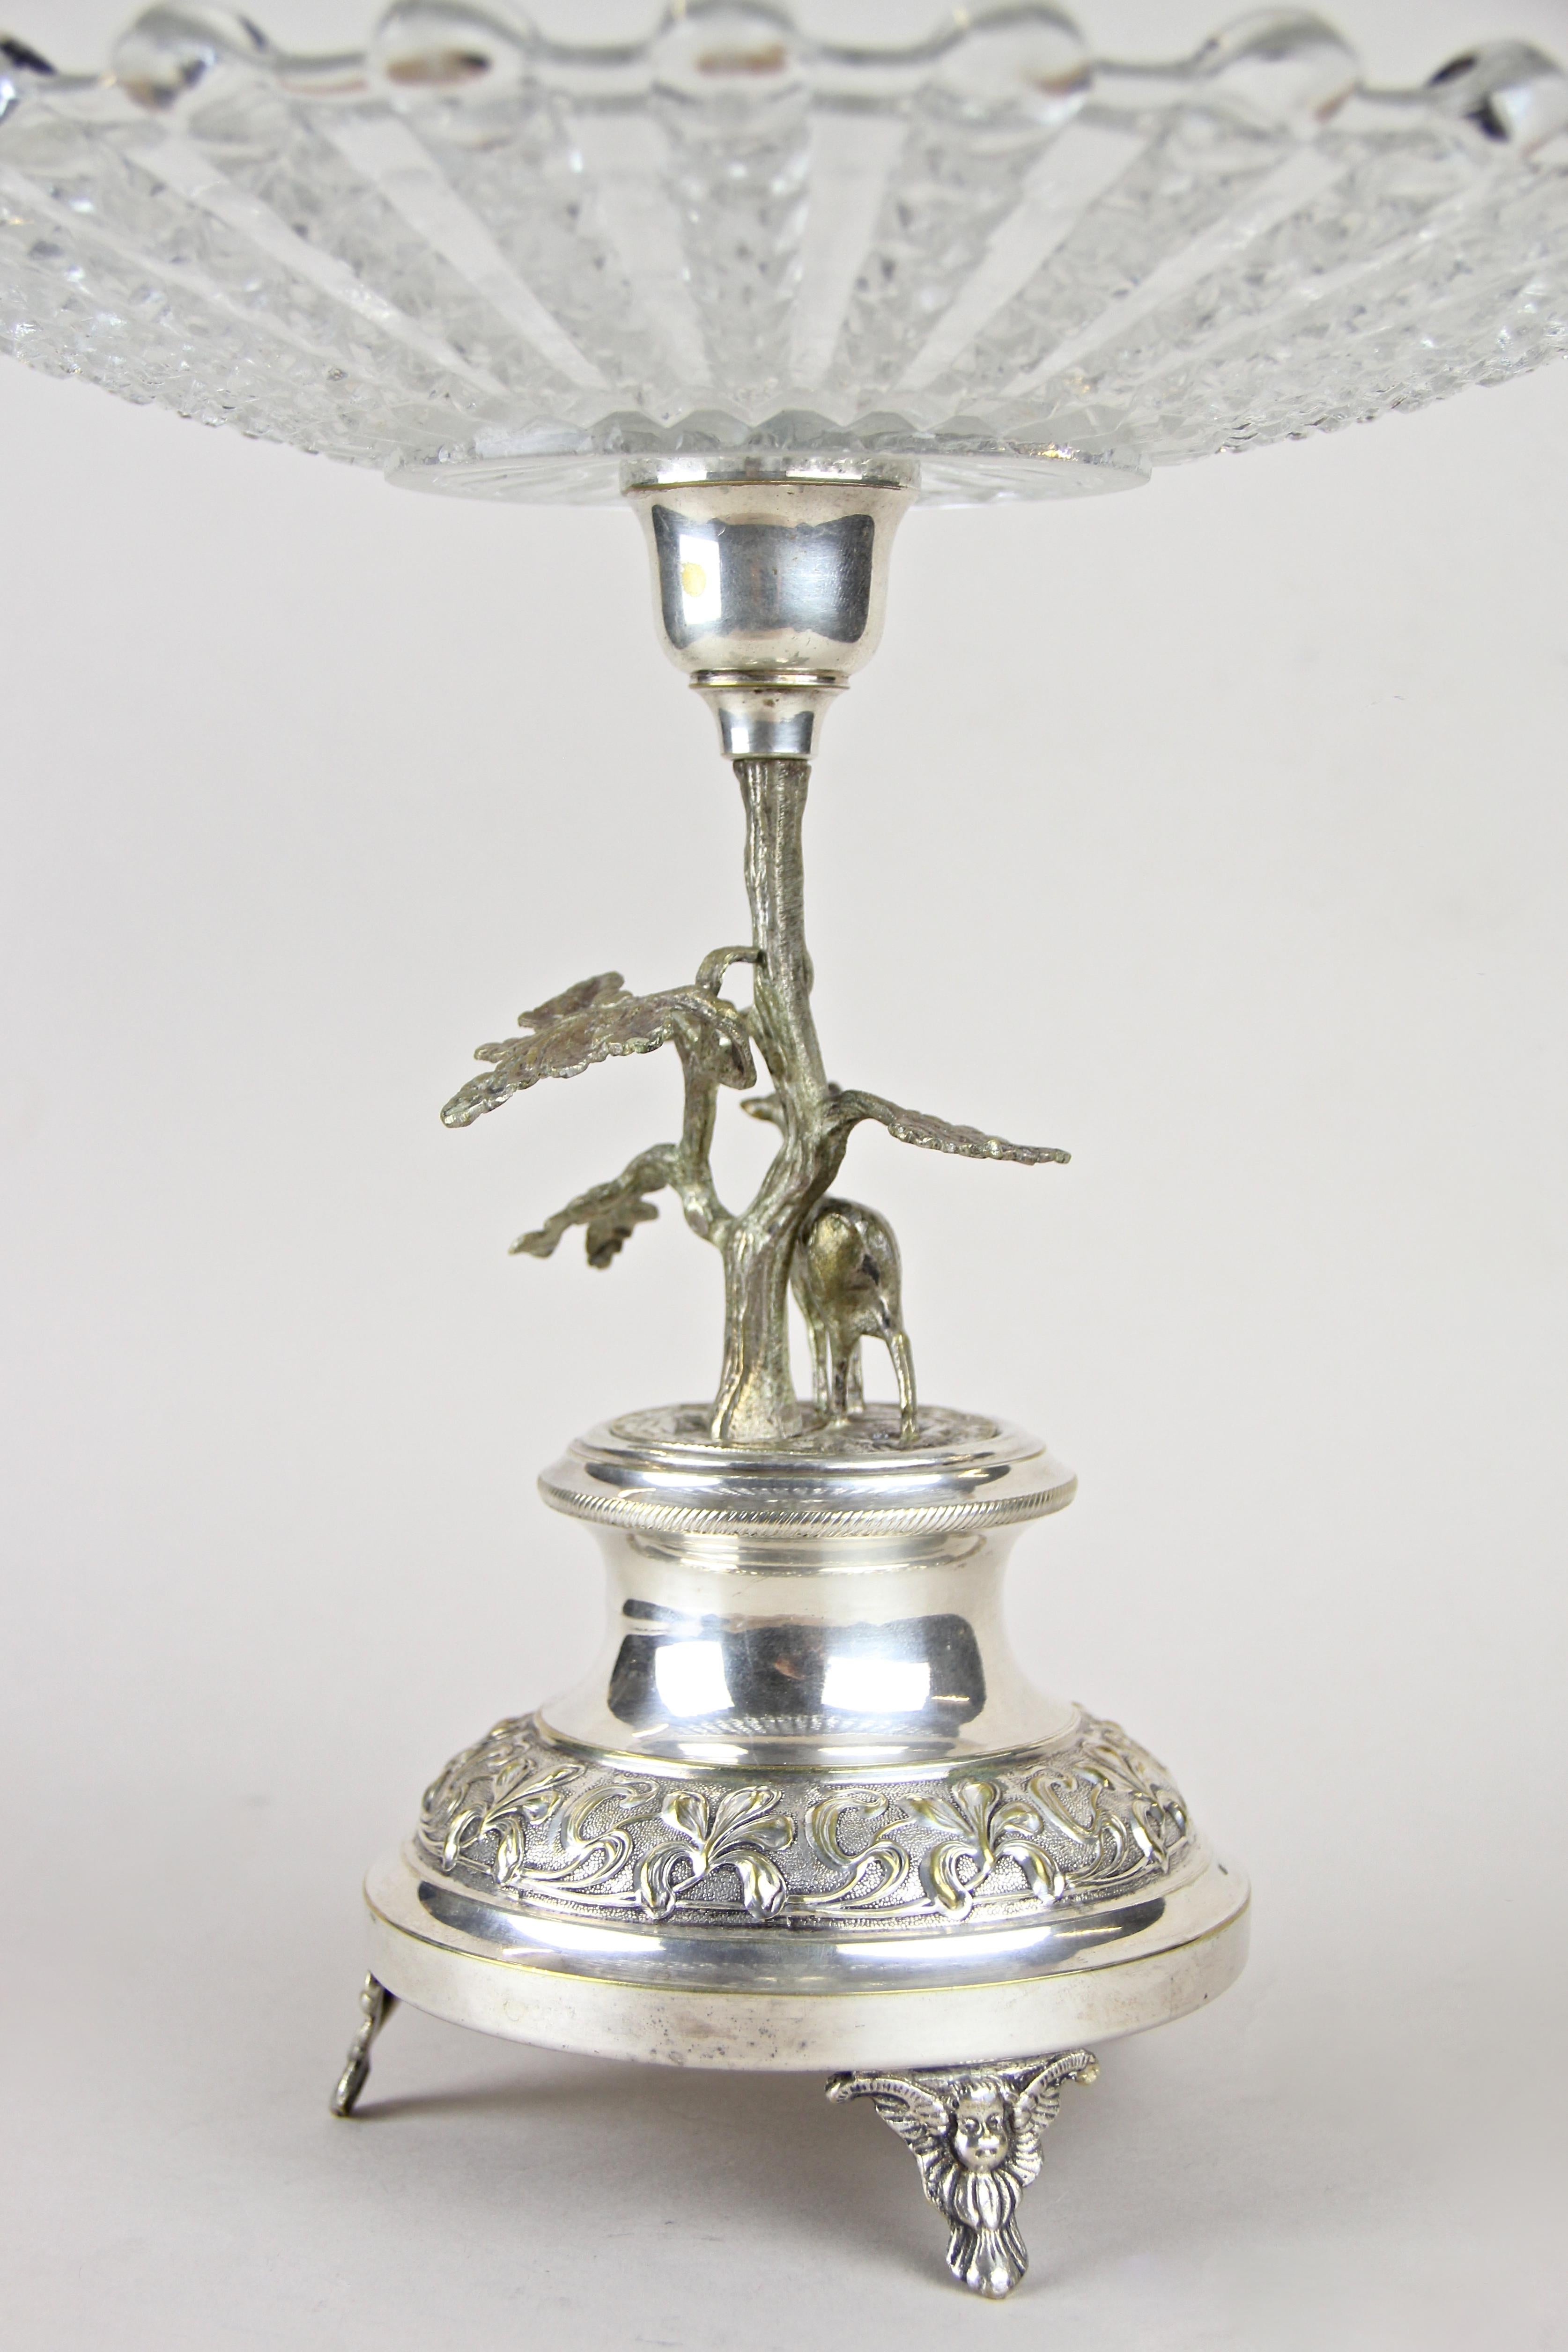 Charming silvered centerpiece out of Austria from the Art Nouveau period, circa 1910. The beautiful pressed glass plate sits on an artful handcrafted silvered brass base depicting a small deer figurine under a tree. A real lovely Centerpiece from